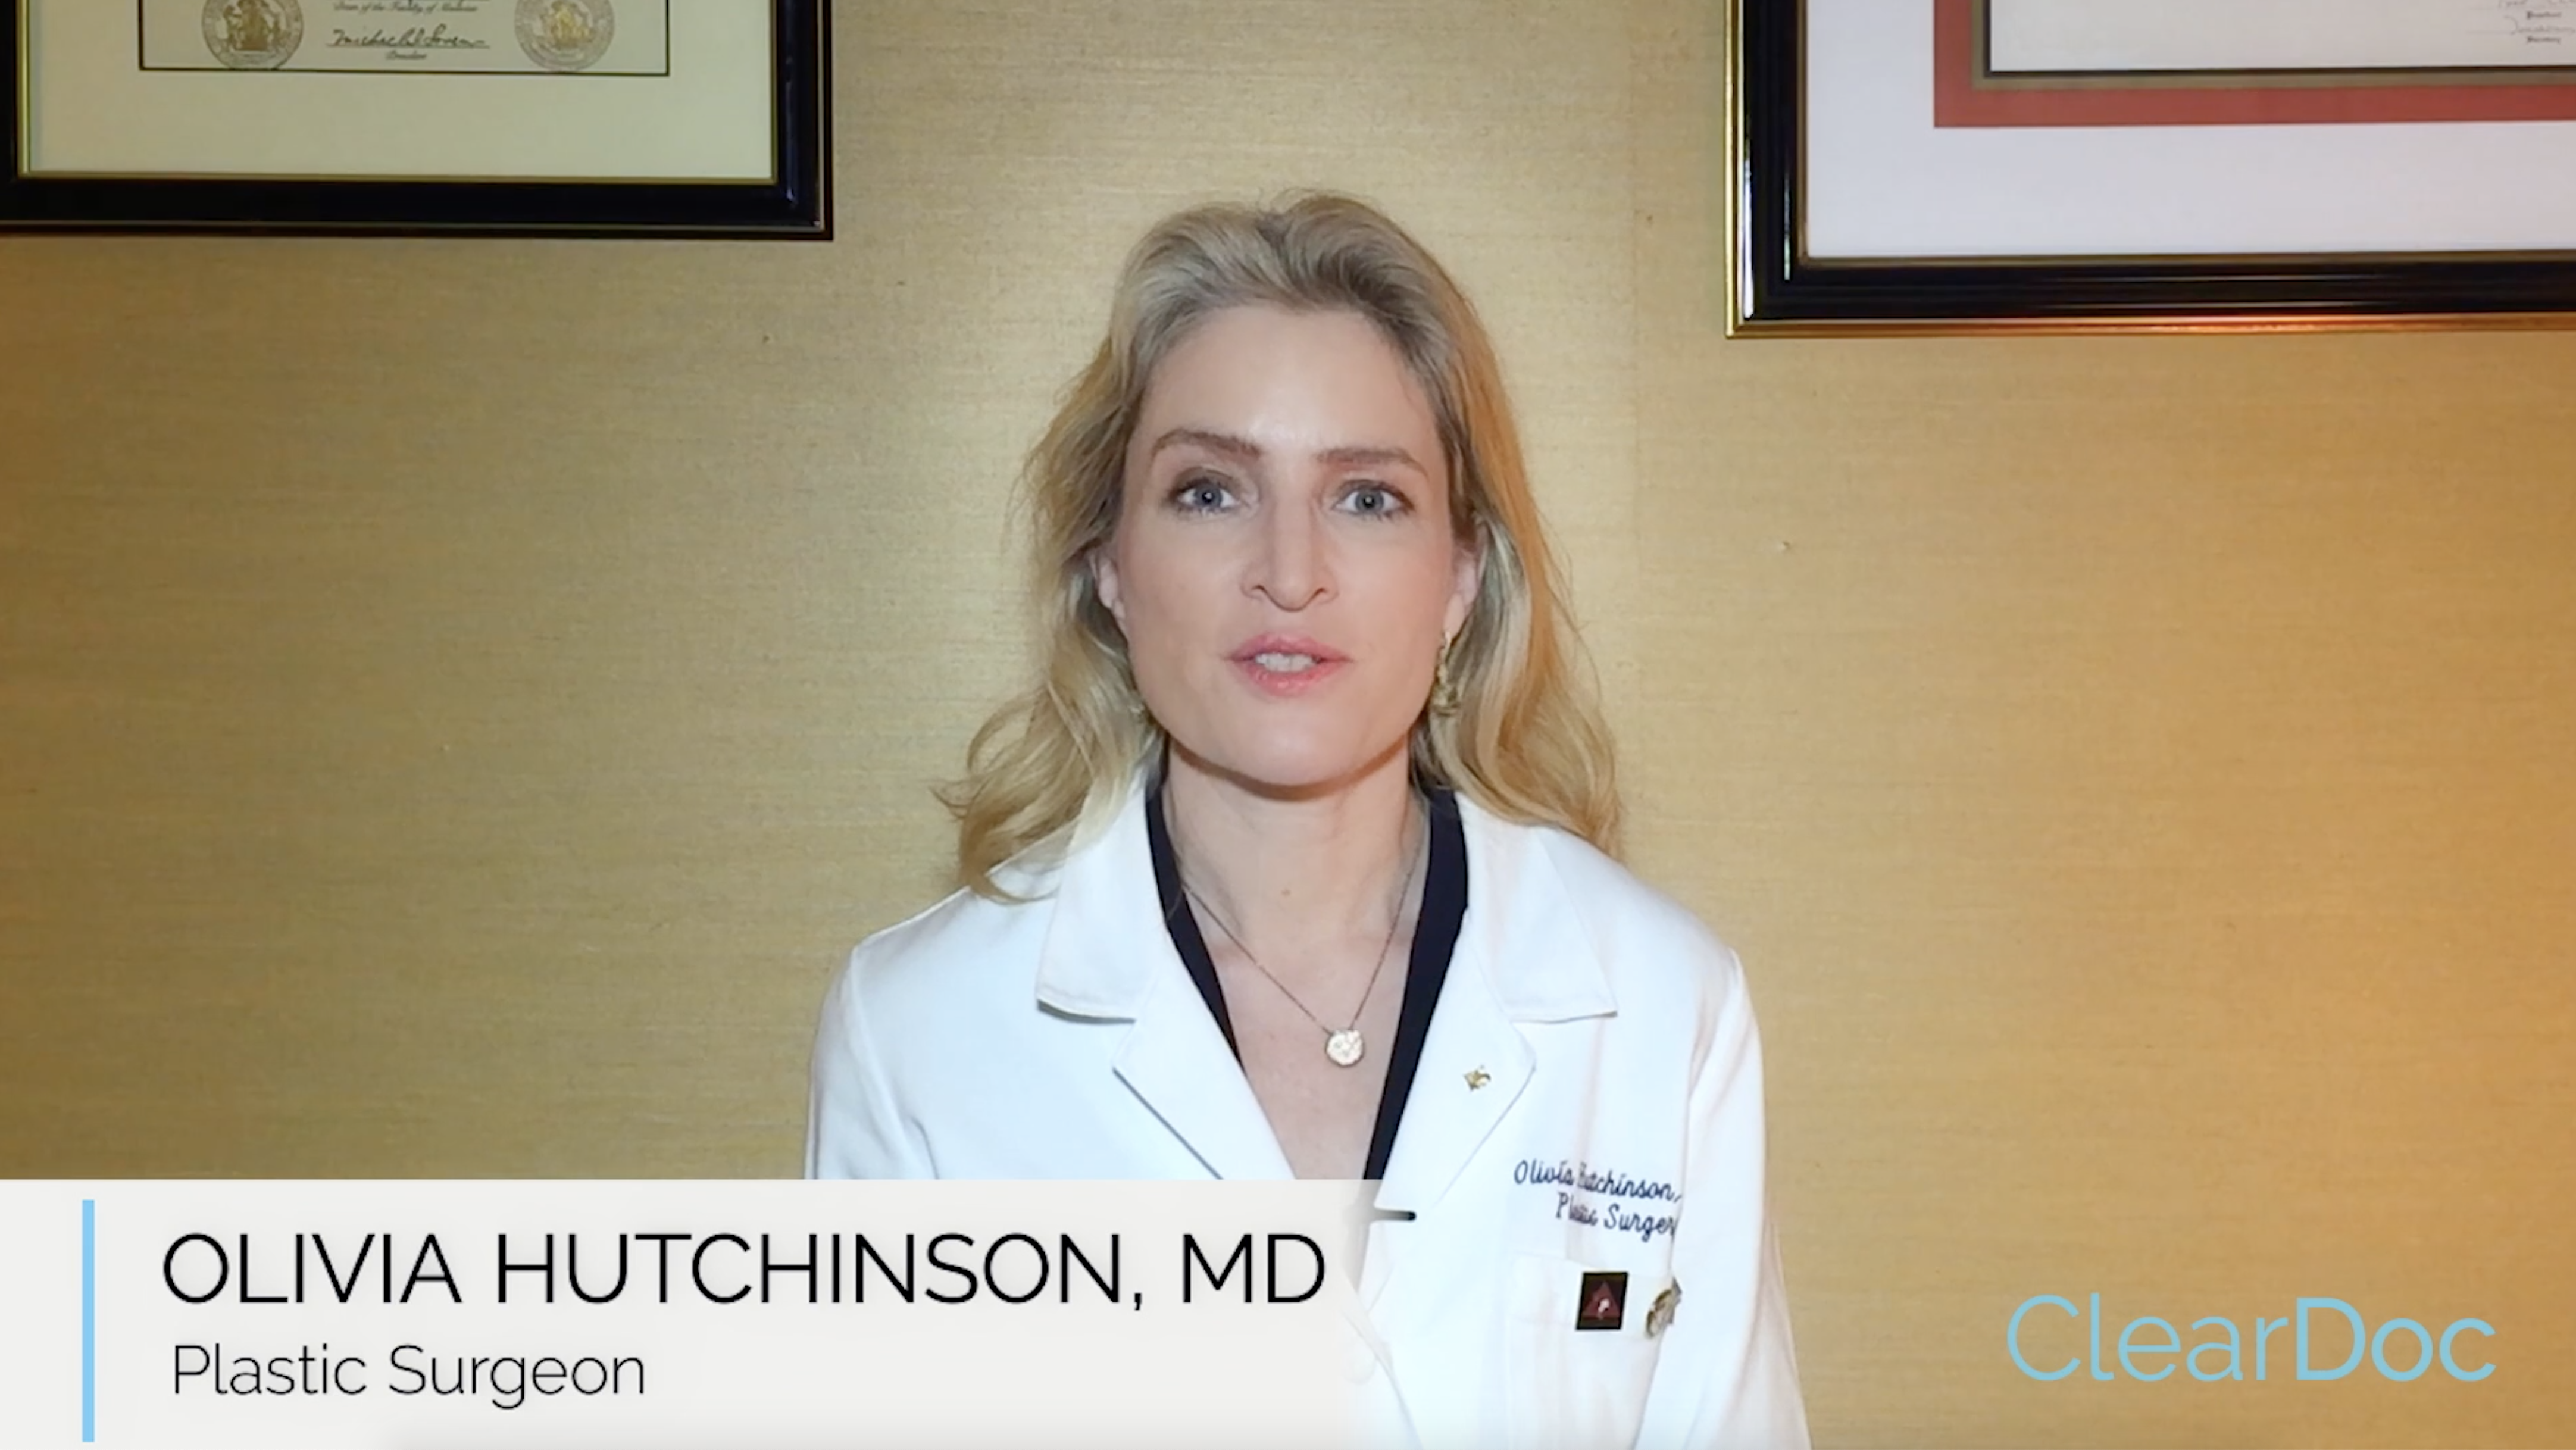 Dr. Olivia Hutchinson featured on ClearDoc